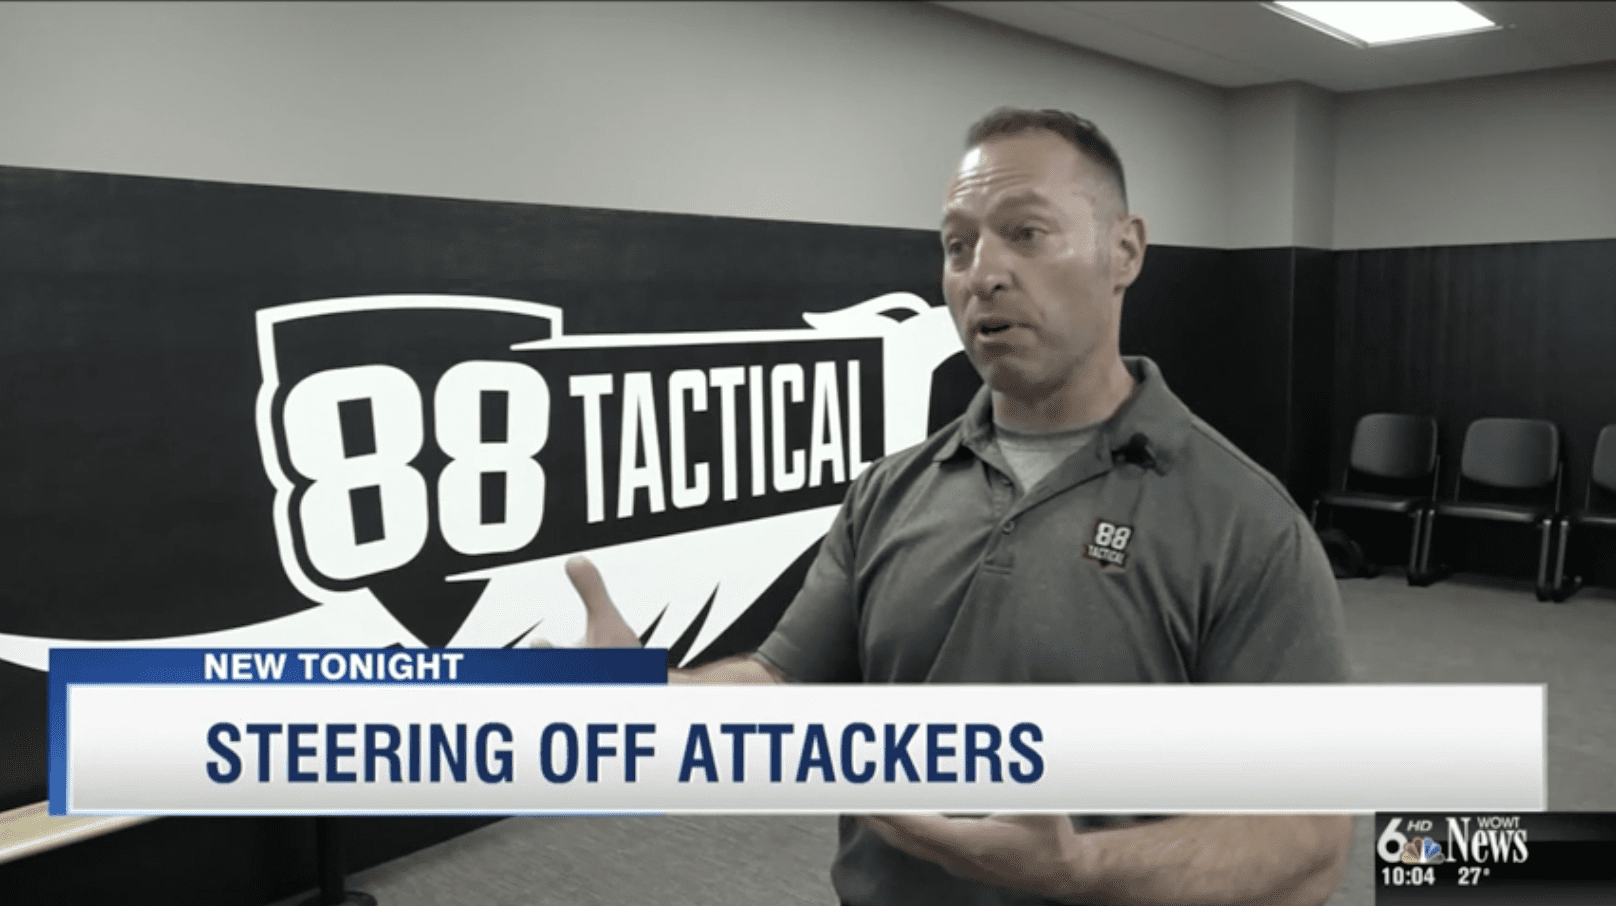 Self-defense and How to Steer Off Attackers